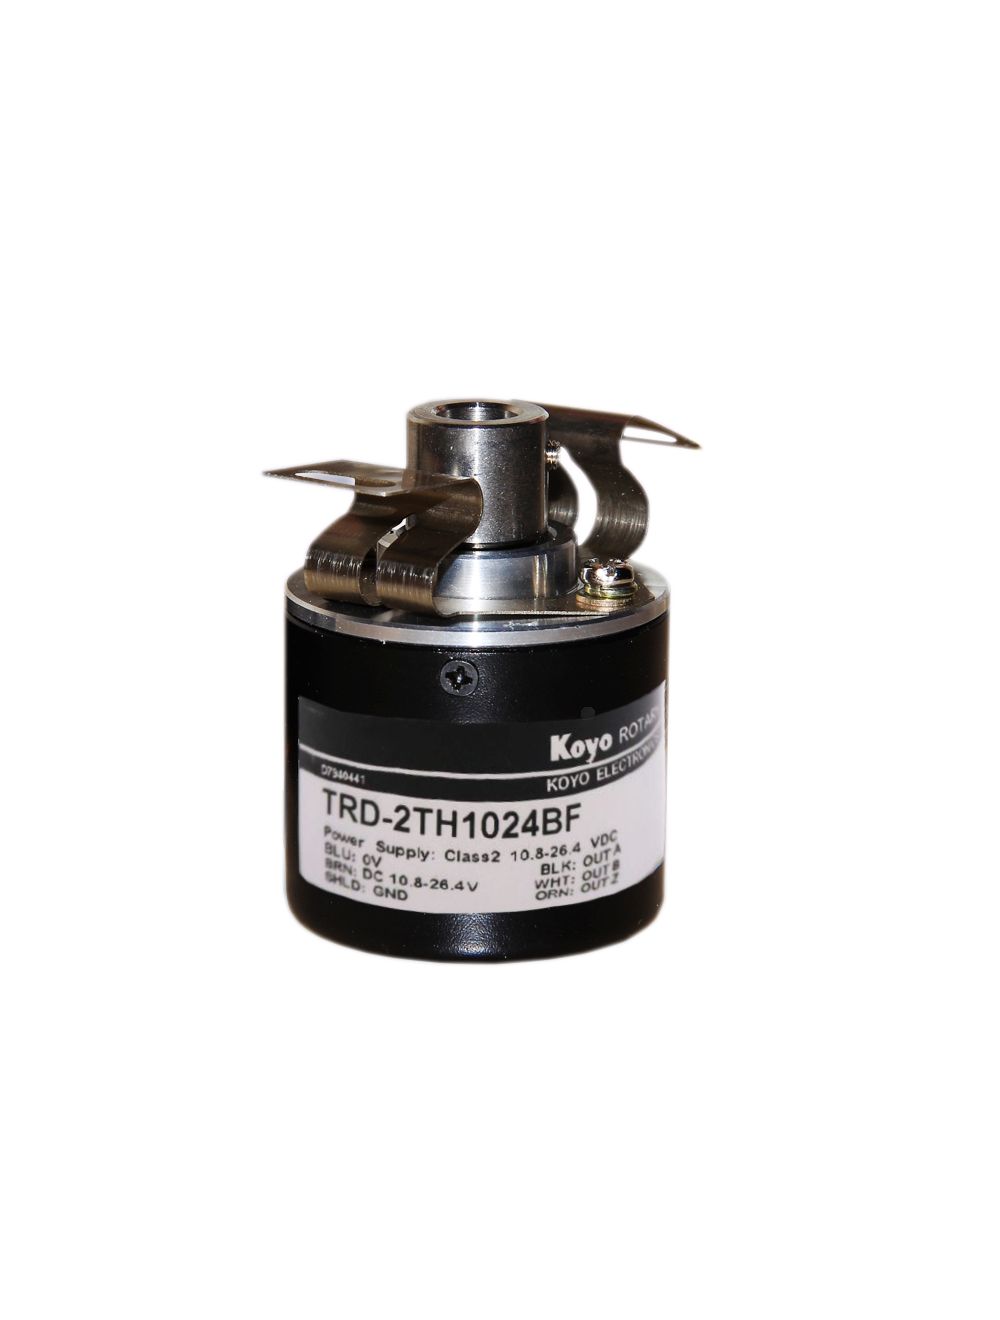 New In stock for sale, KOYO Hollow-shaft Incremental Rotary Encoder TRD-2TH1024BF